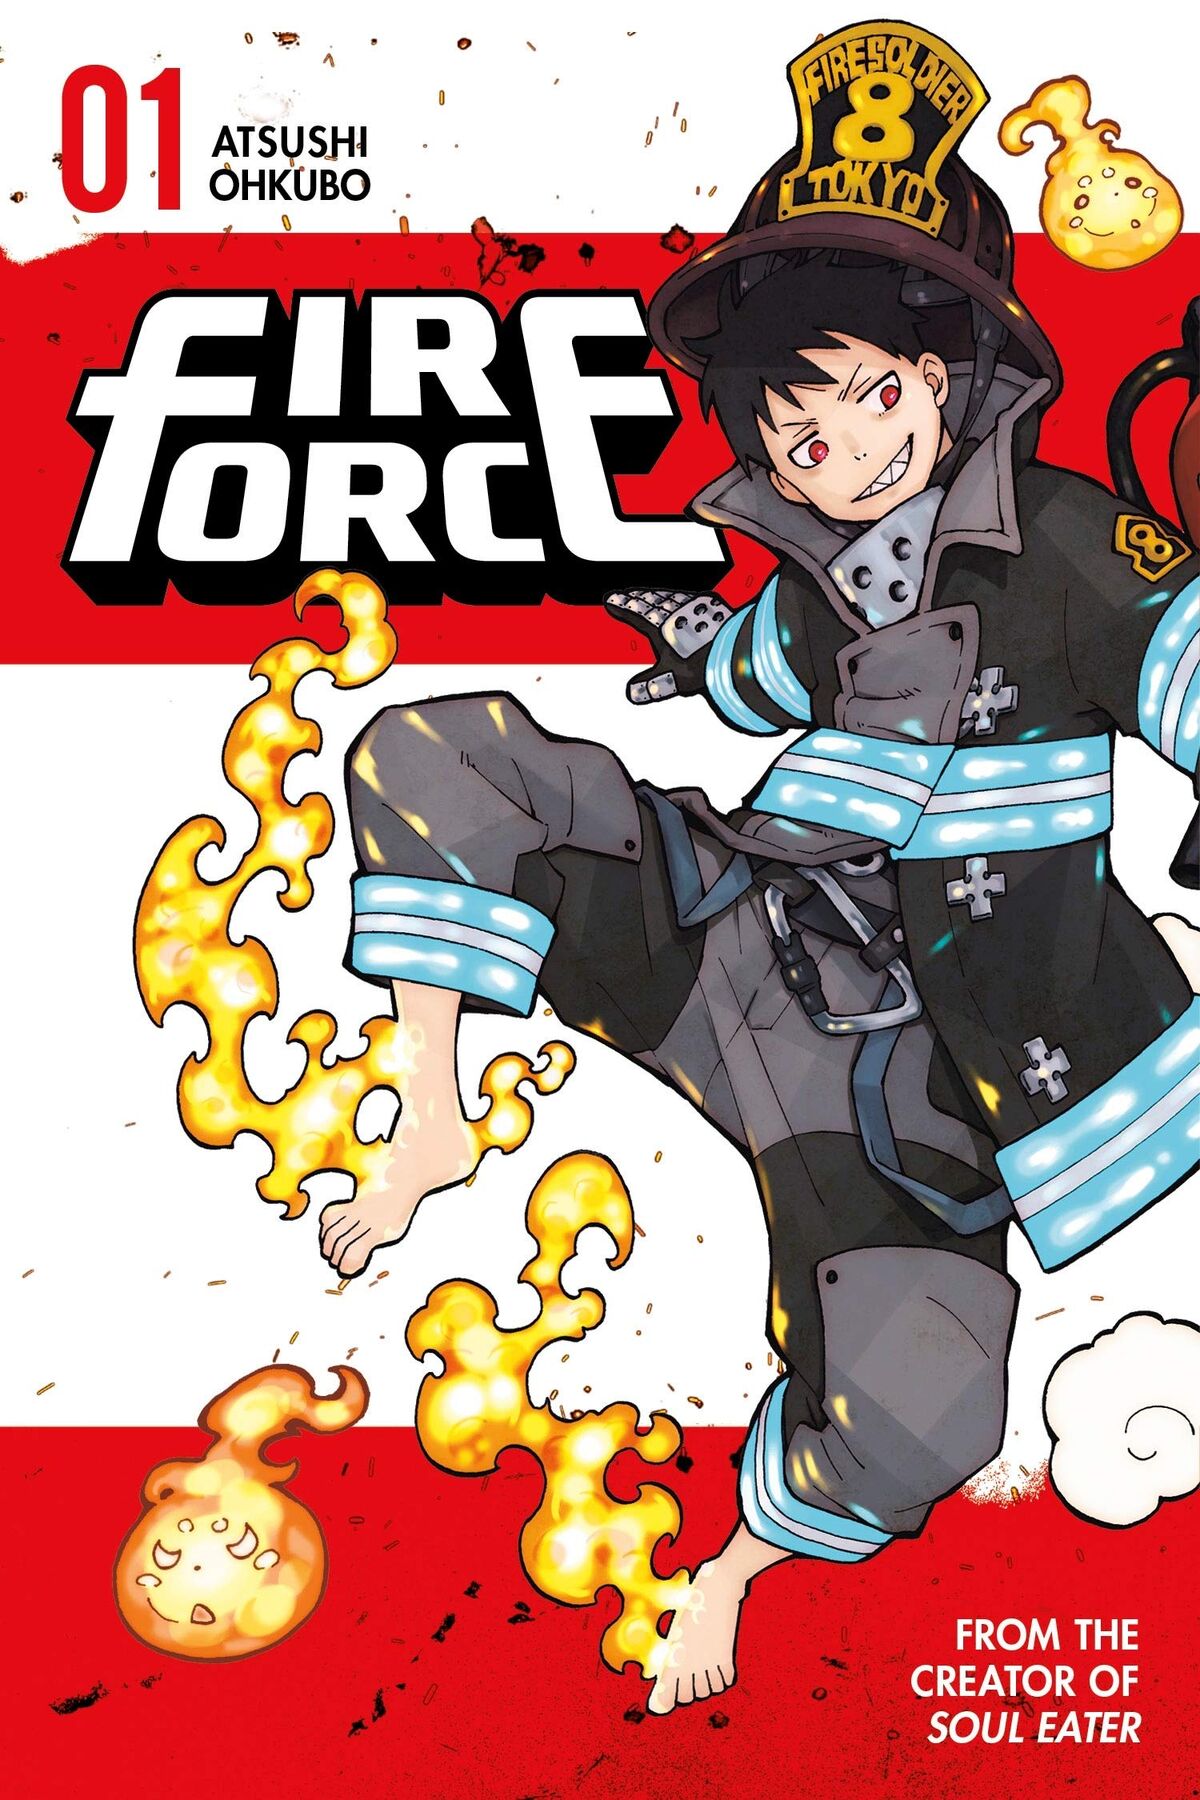 From Soul Eater to Fire Force to Soul World